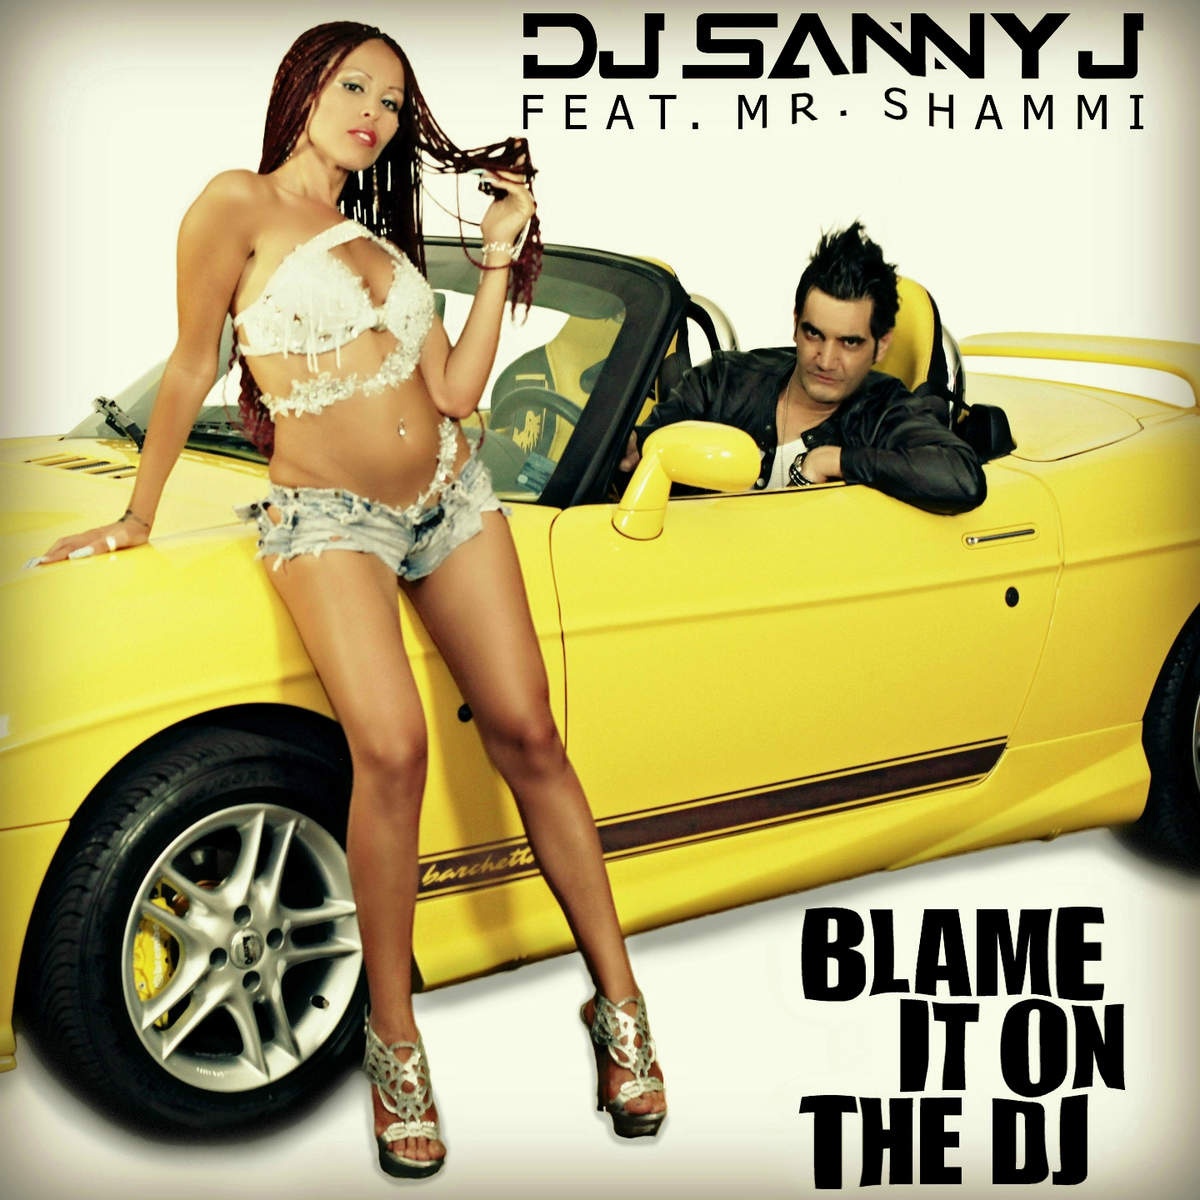 Blame It On the DJ (Original Extended Mix)